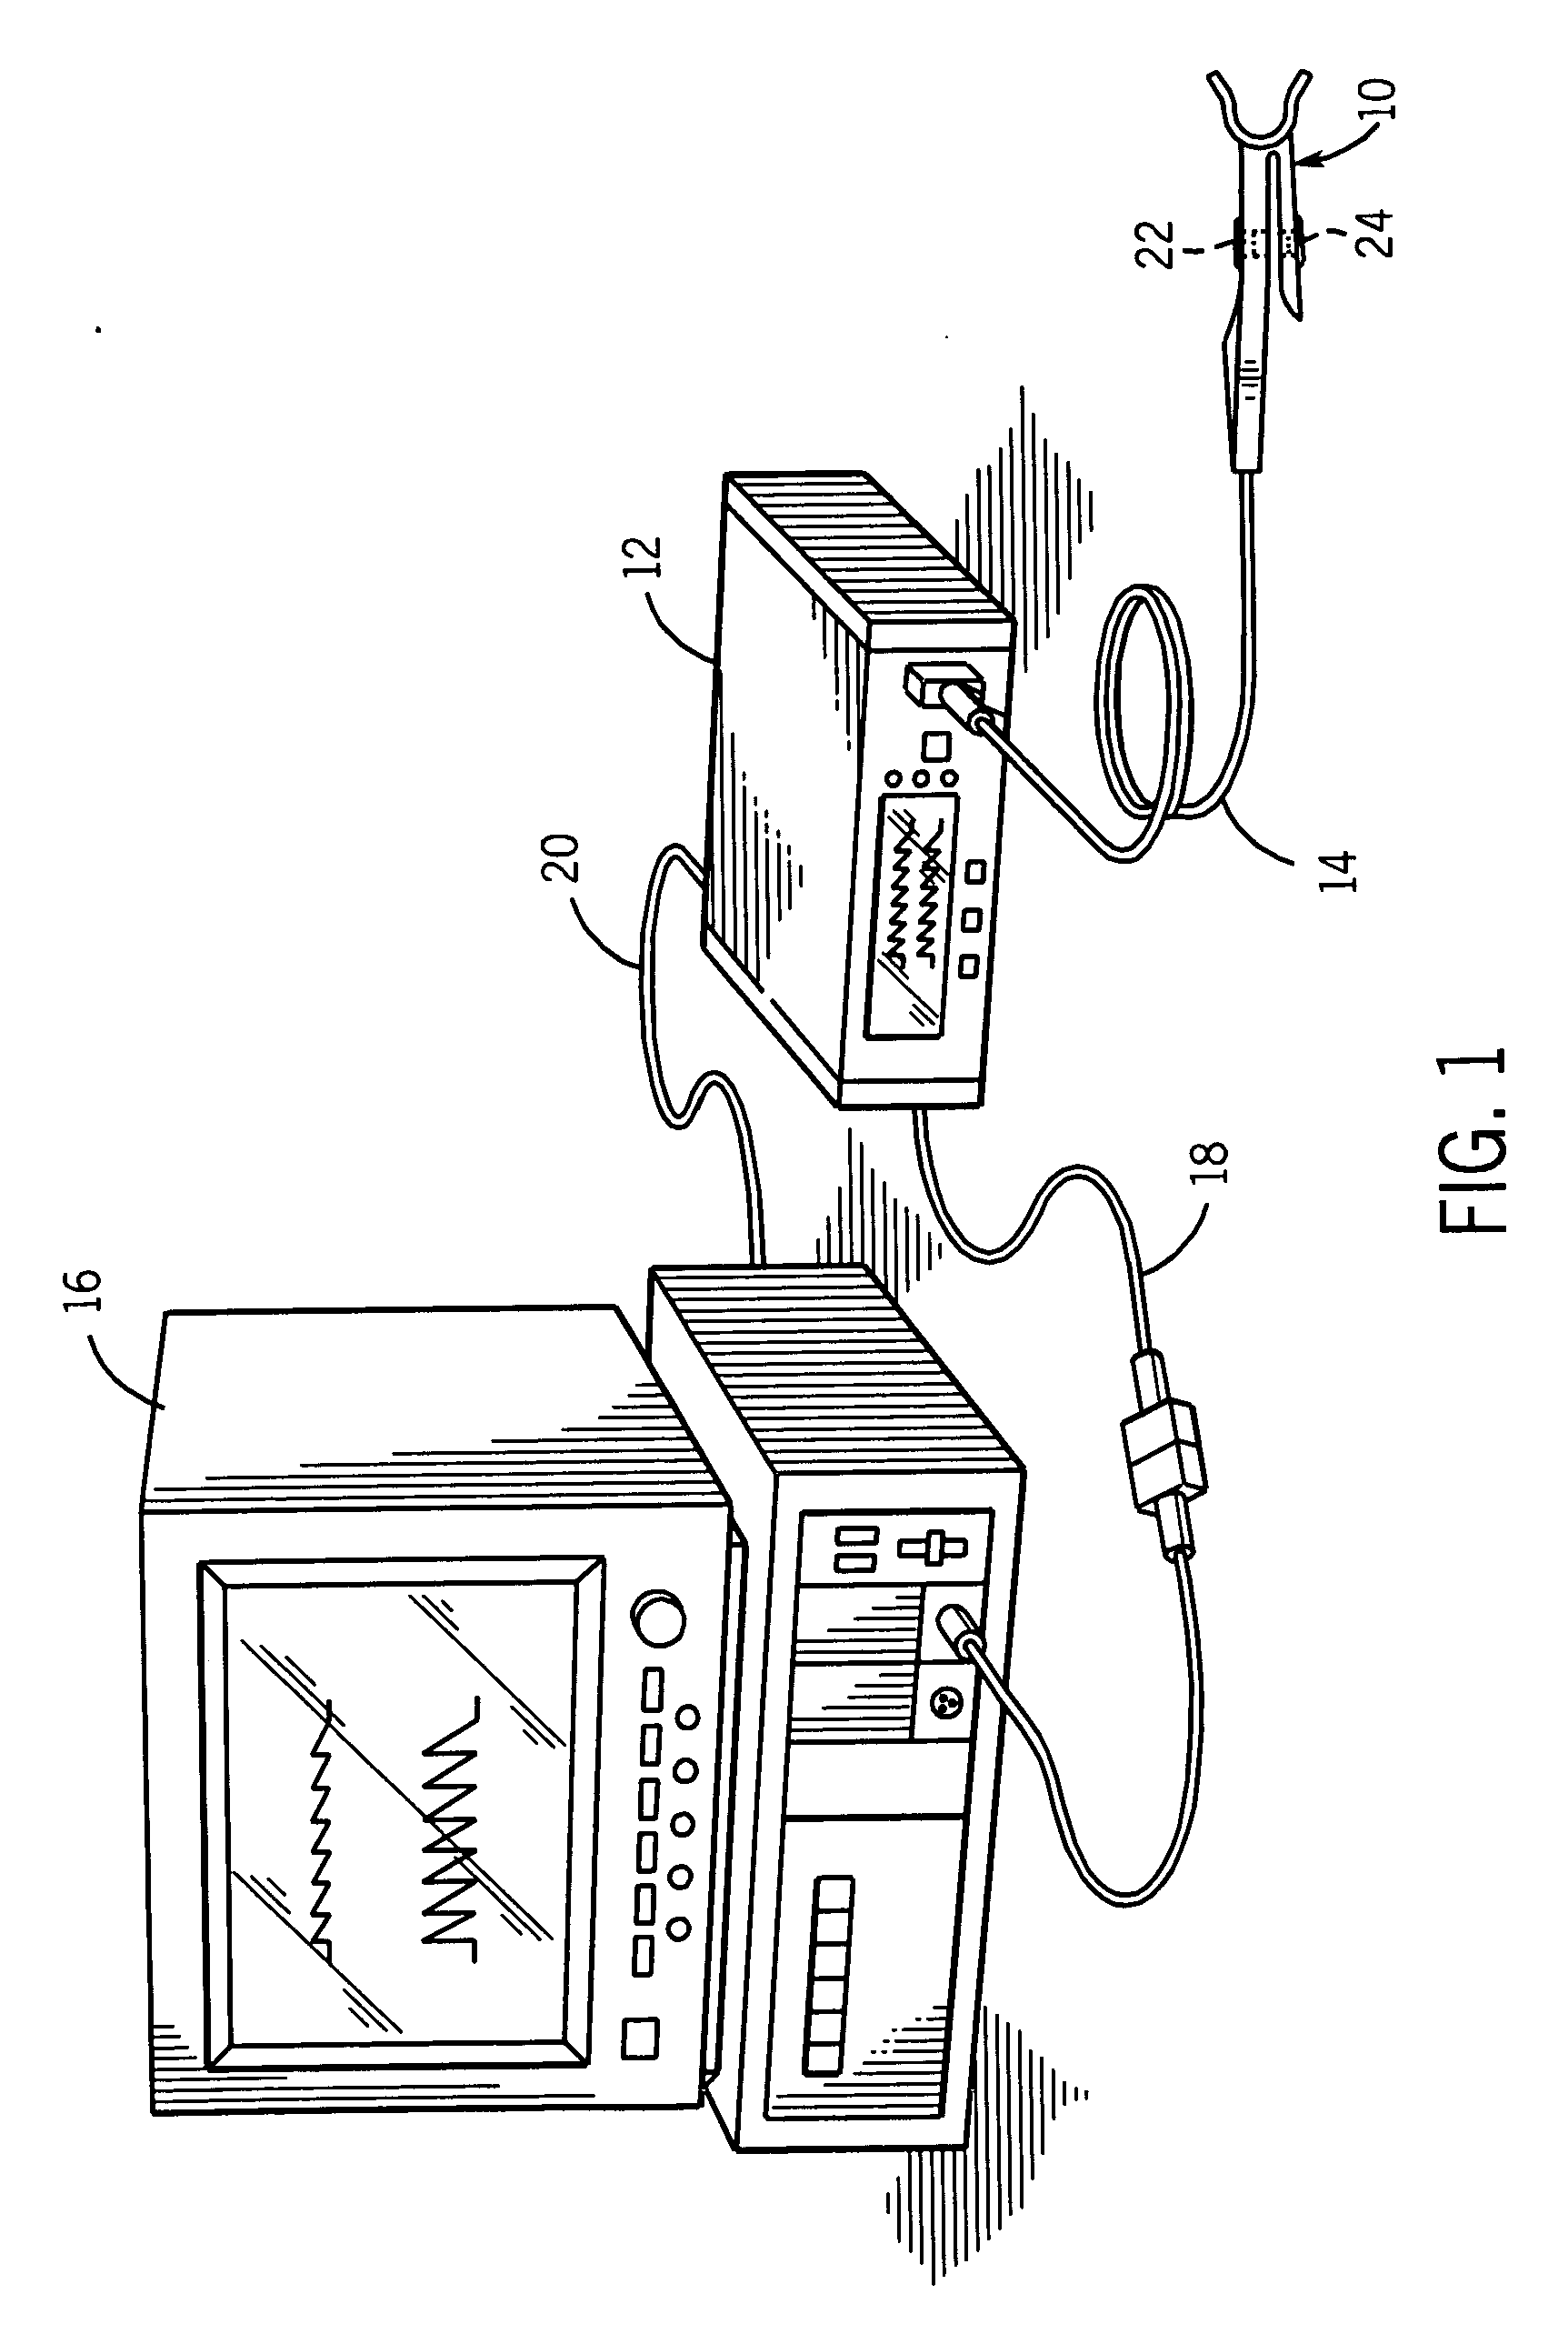 System and method for removing artifacts from waveforms